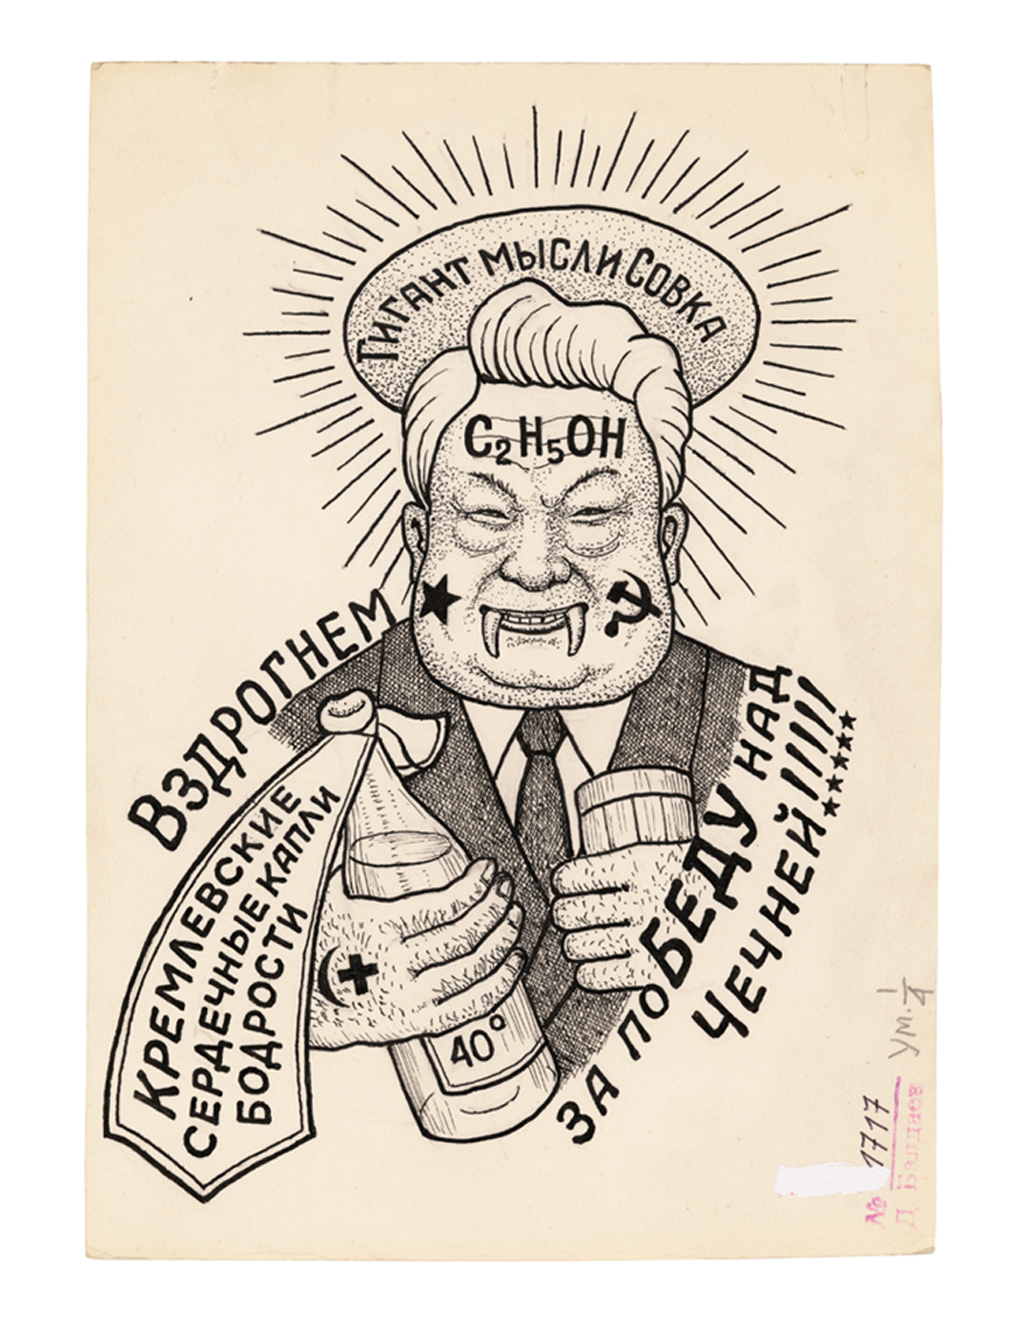 From the top the text reads ‘Giant of Soviet thought, C2H5OH [the molecular formula for alcohol]. Down the hatch, Cheering Kremlin Heart Drops, For victory over Chechnya!!!!!’. A caricature known as ‘Japanese eyes’. The wearer fought in the Chechen war of 1994-1996.